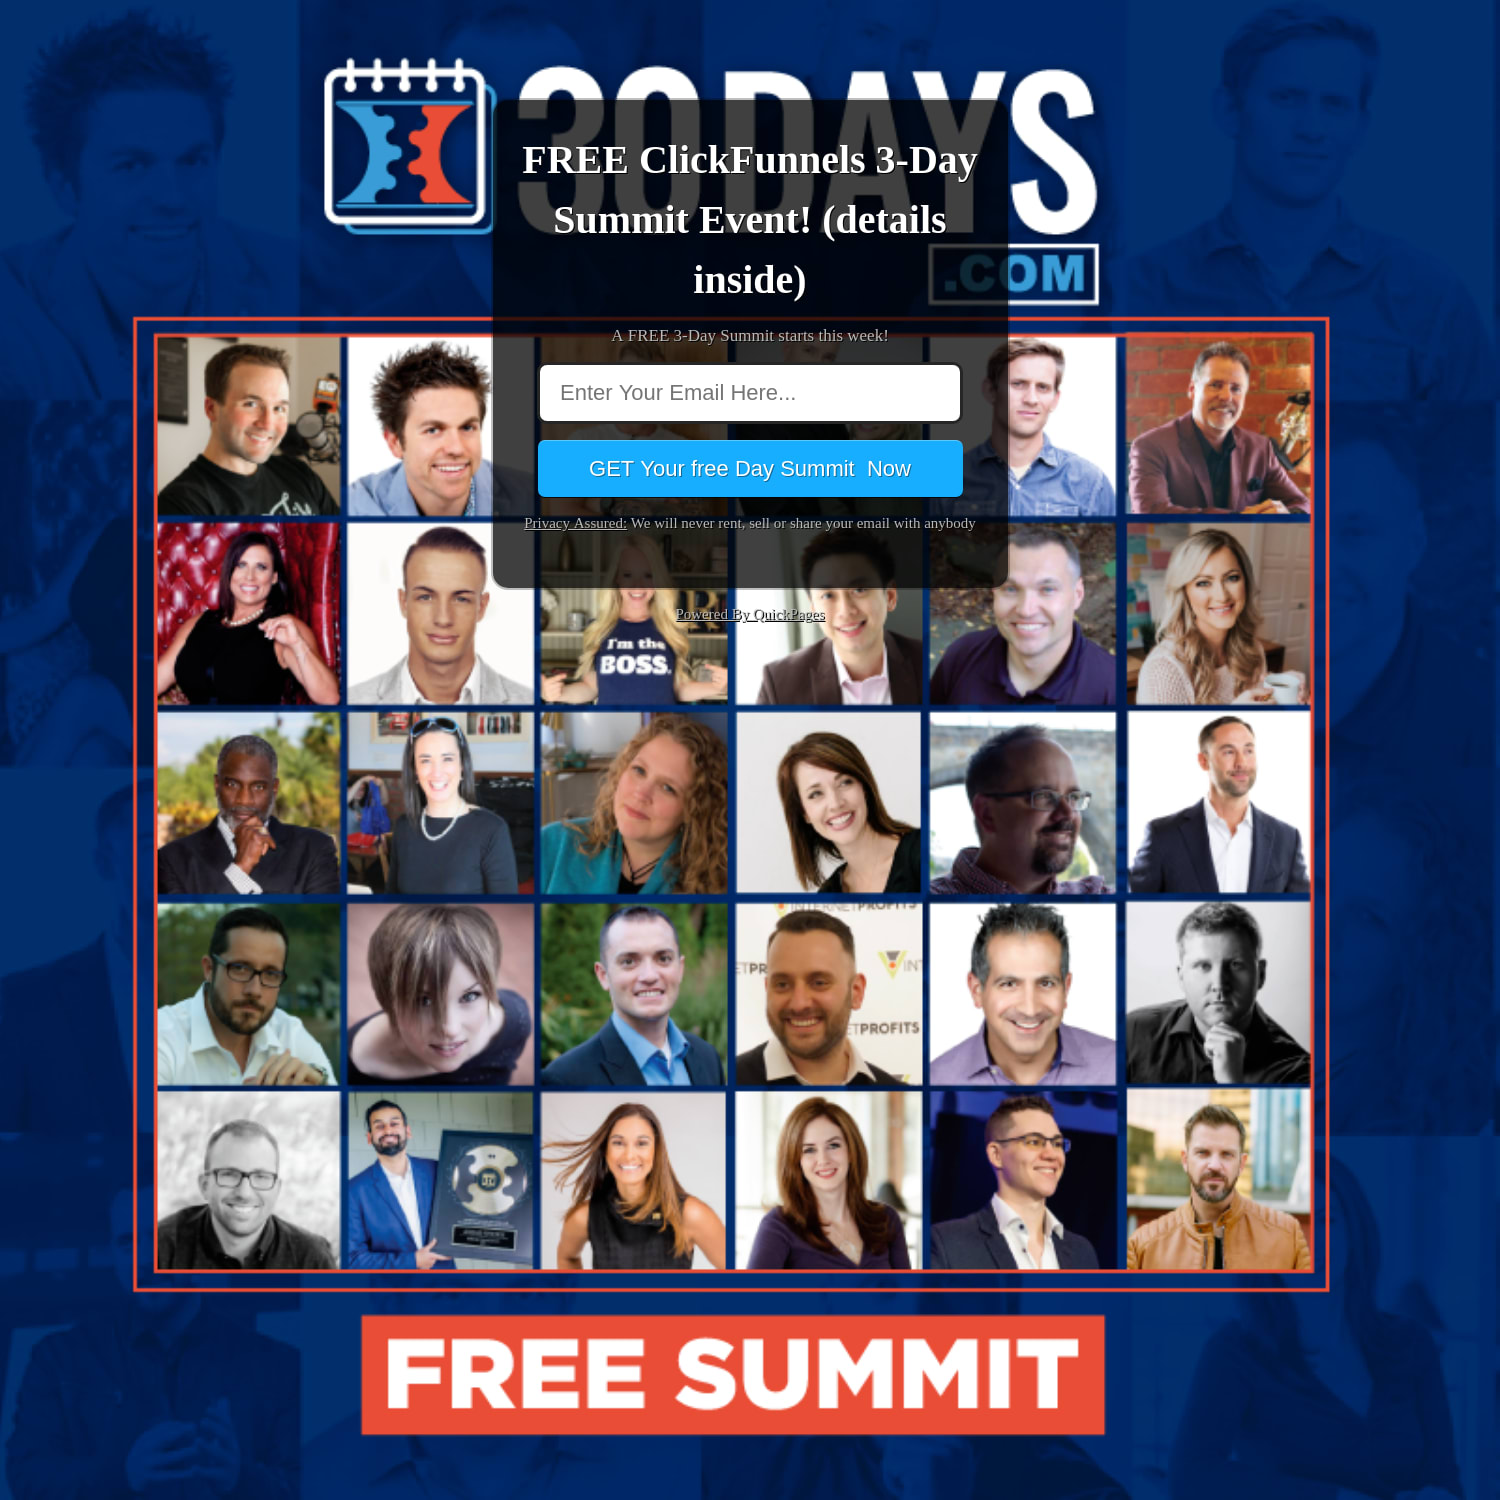 A FREE 3-Day Summit starts this week!